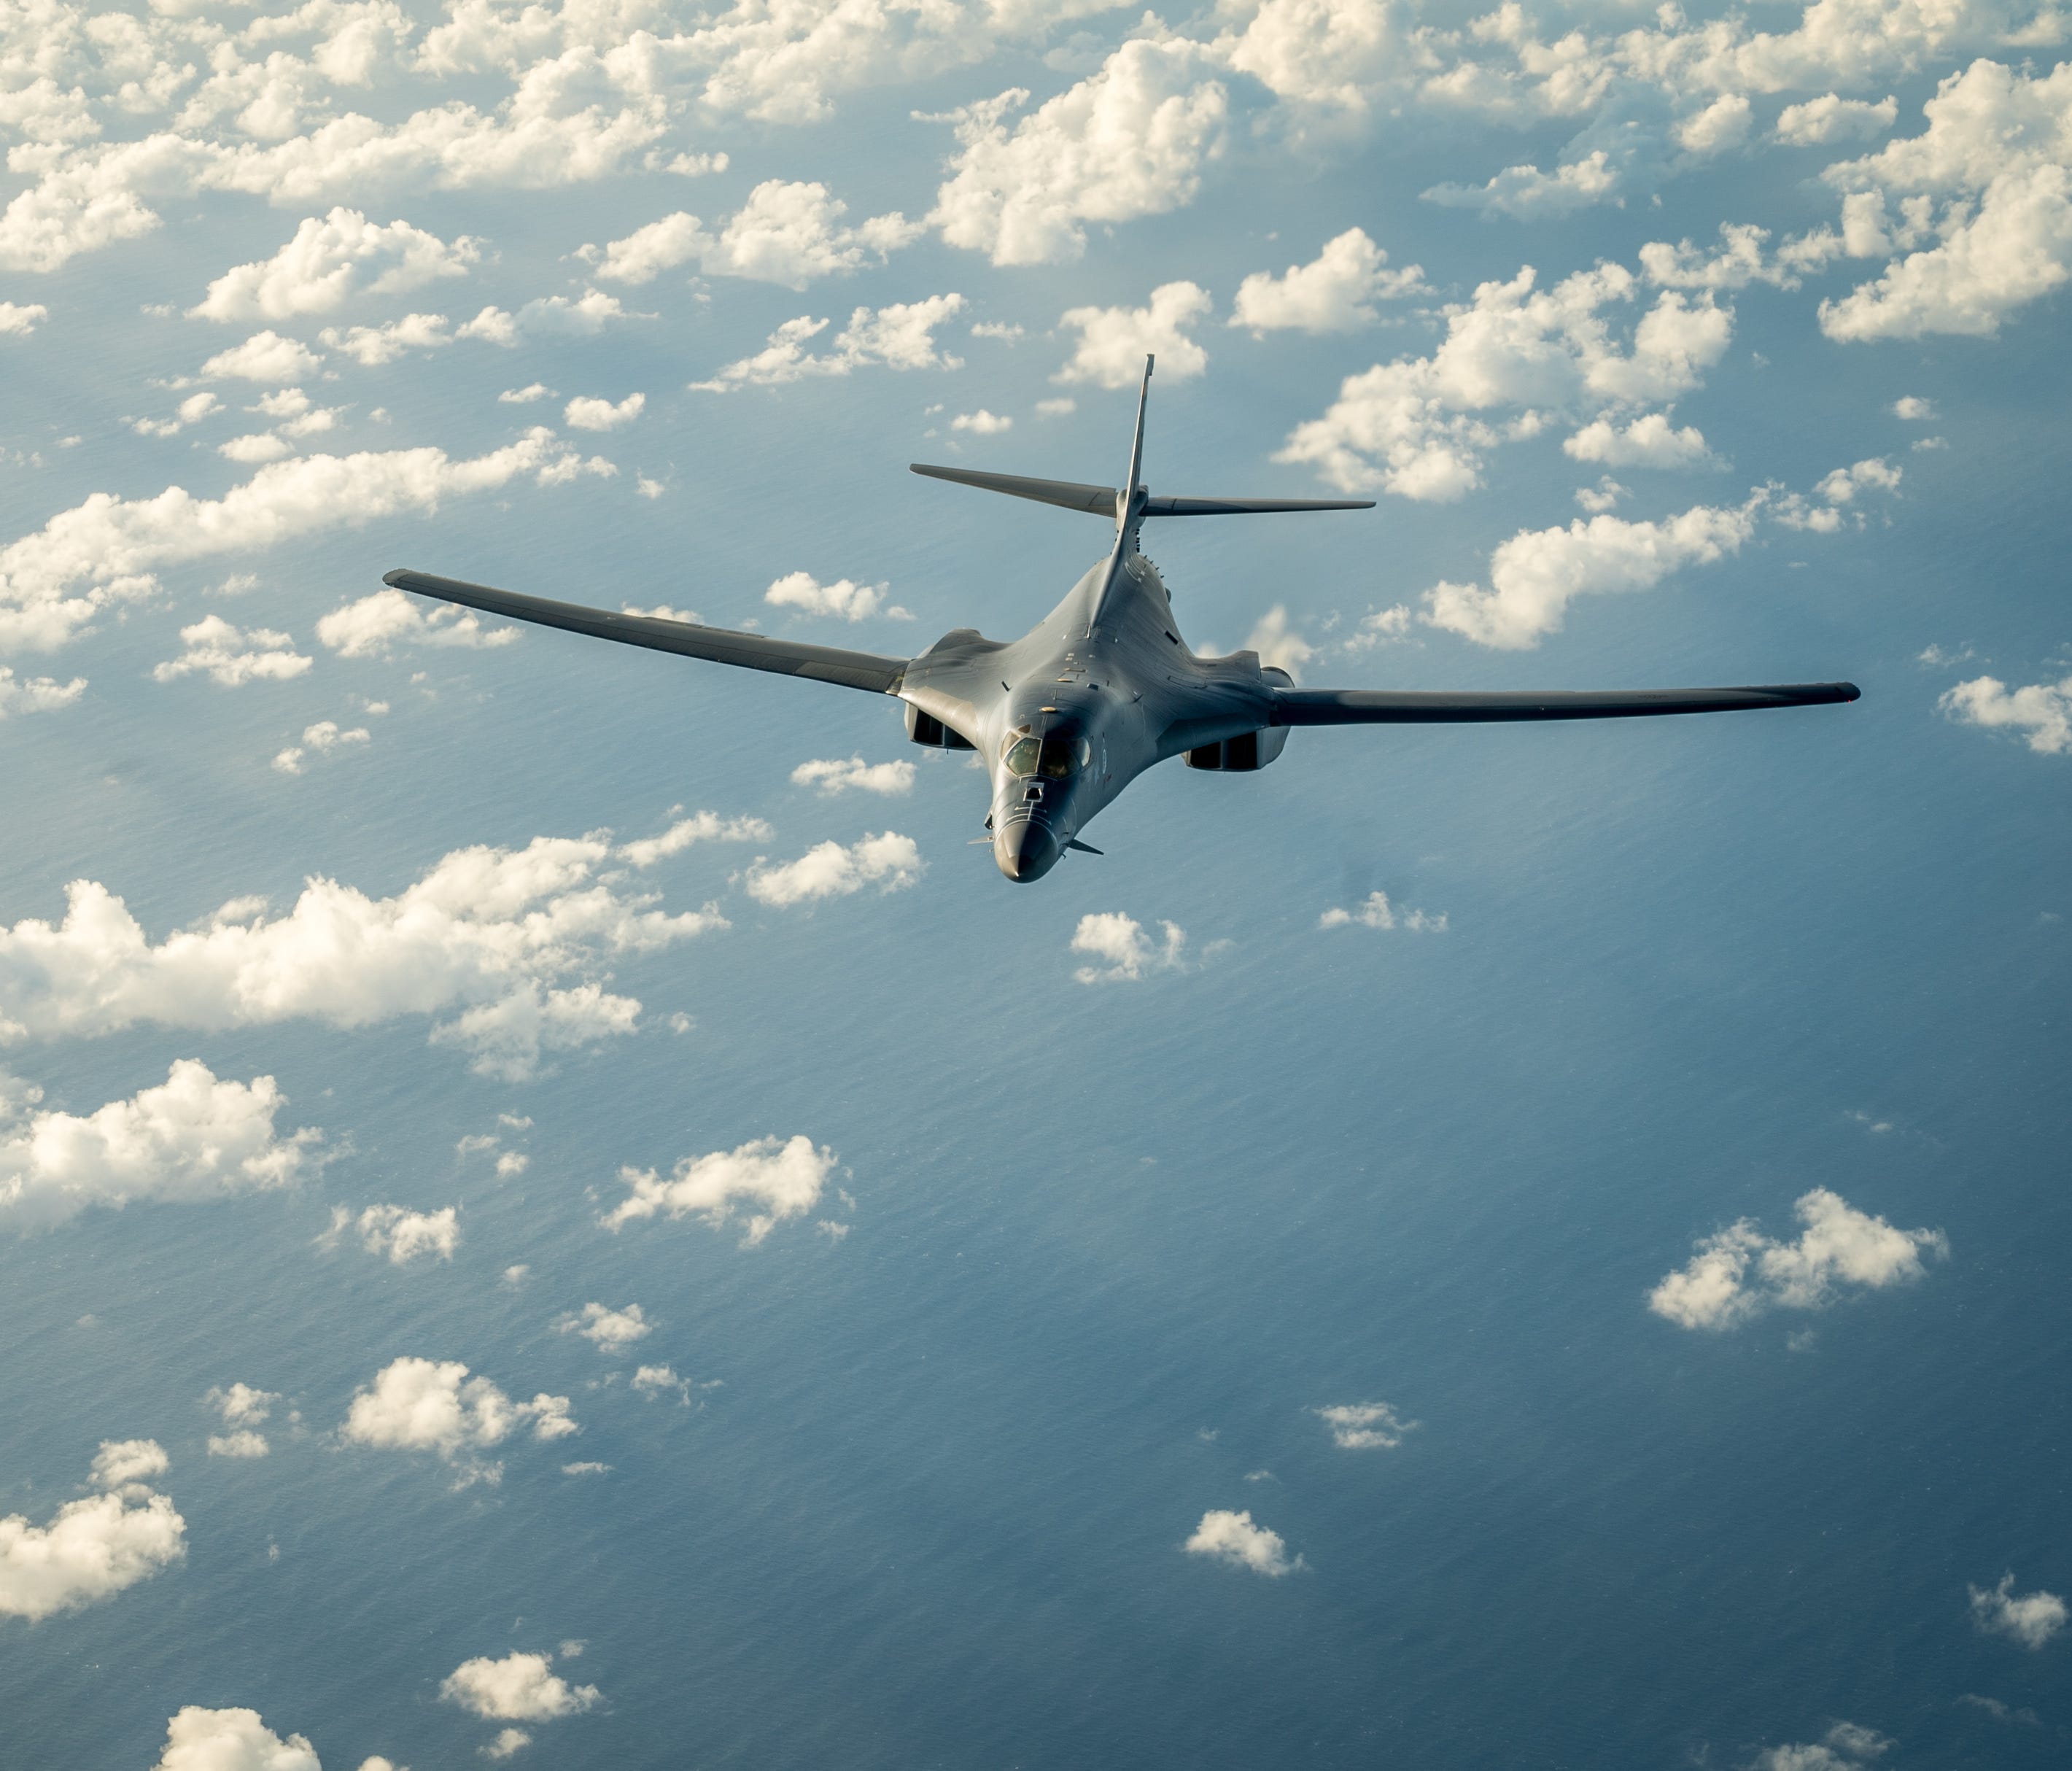 A U.S. Air Force B-1B Lancer participates in a 10-hour mission from Andersen Air Force Base, Guam, into Japanese airspace and over the Korean Peninsula, July 30, 2017. The B-1s first made contact with Japan Air Self-Defense Force F-2 fighter jets in 